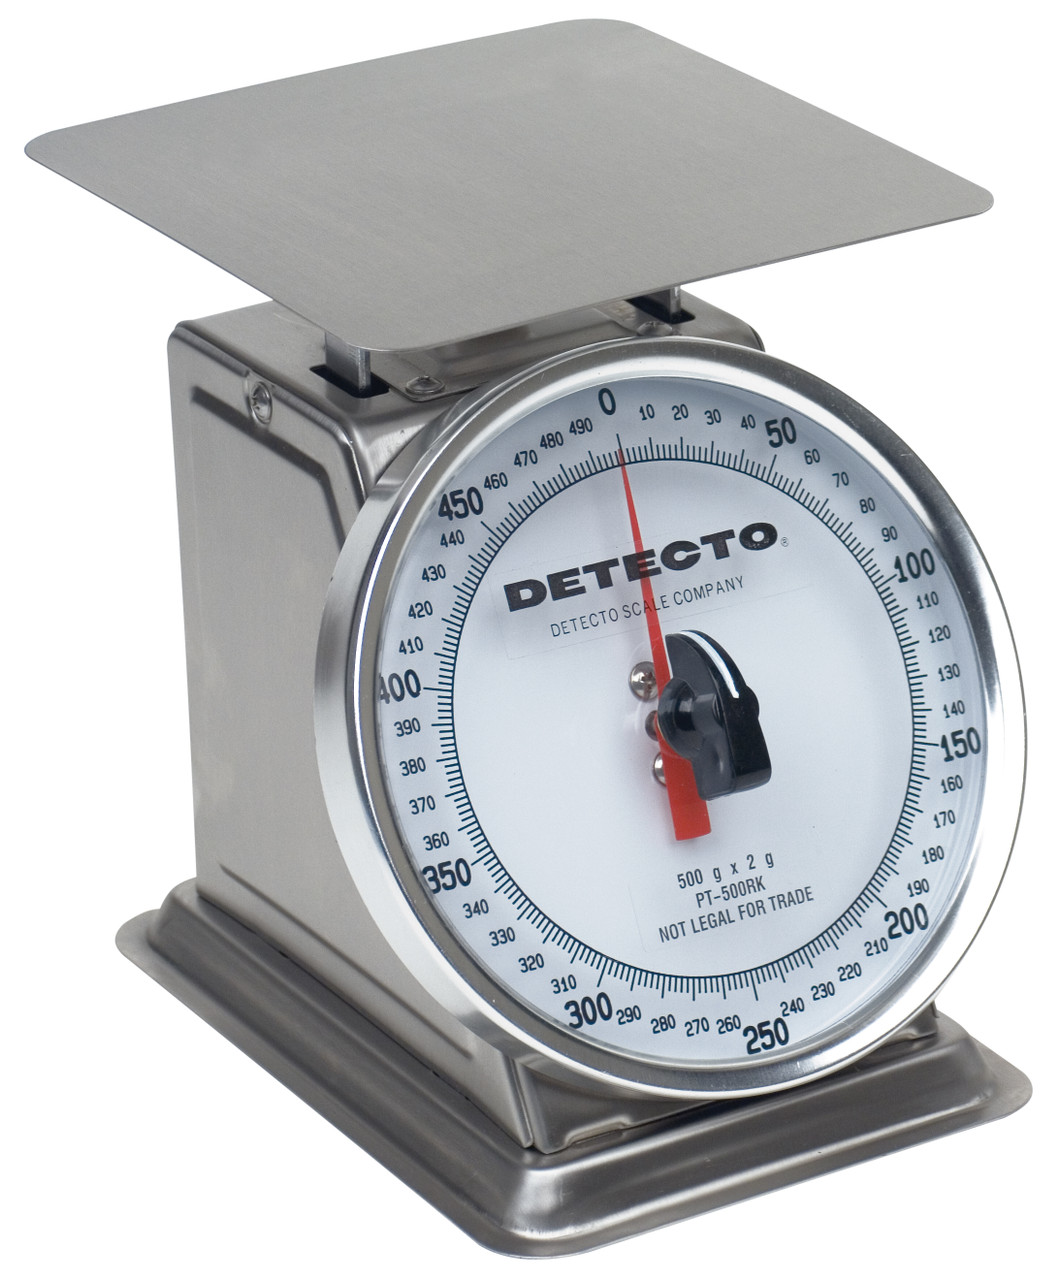 Cardinal Detecto 500 Gram Top Load Rotating Dial Scale 5.75" x 5.75" Stainless Steel, Model# PT-500SRK